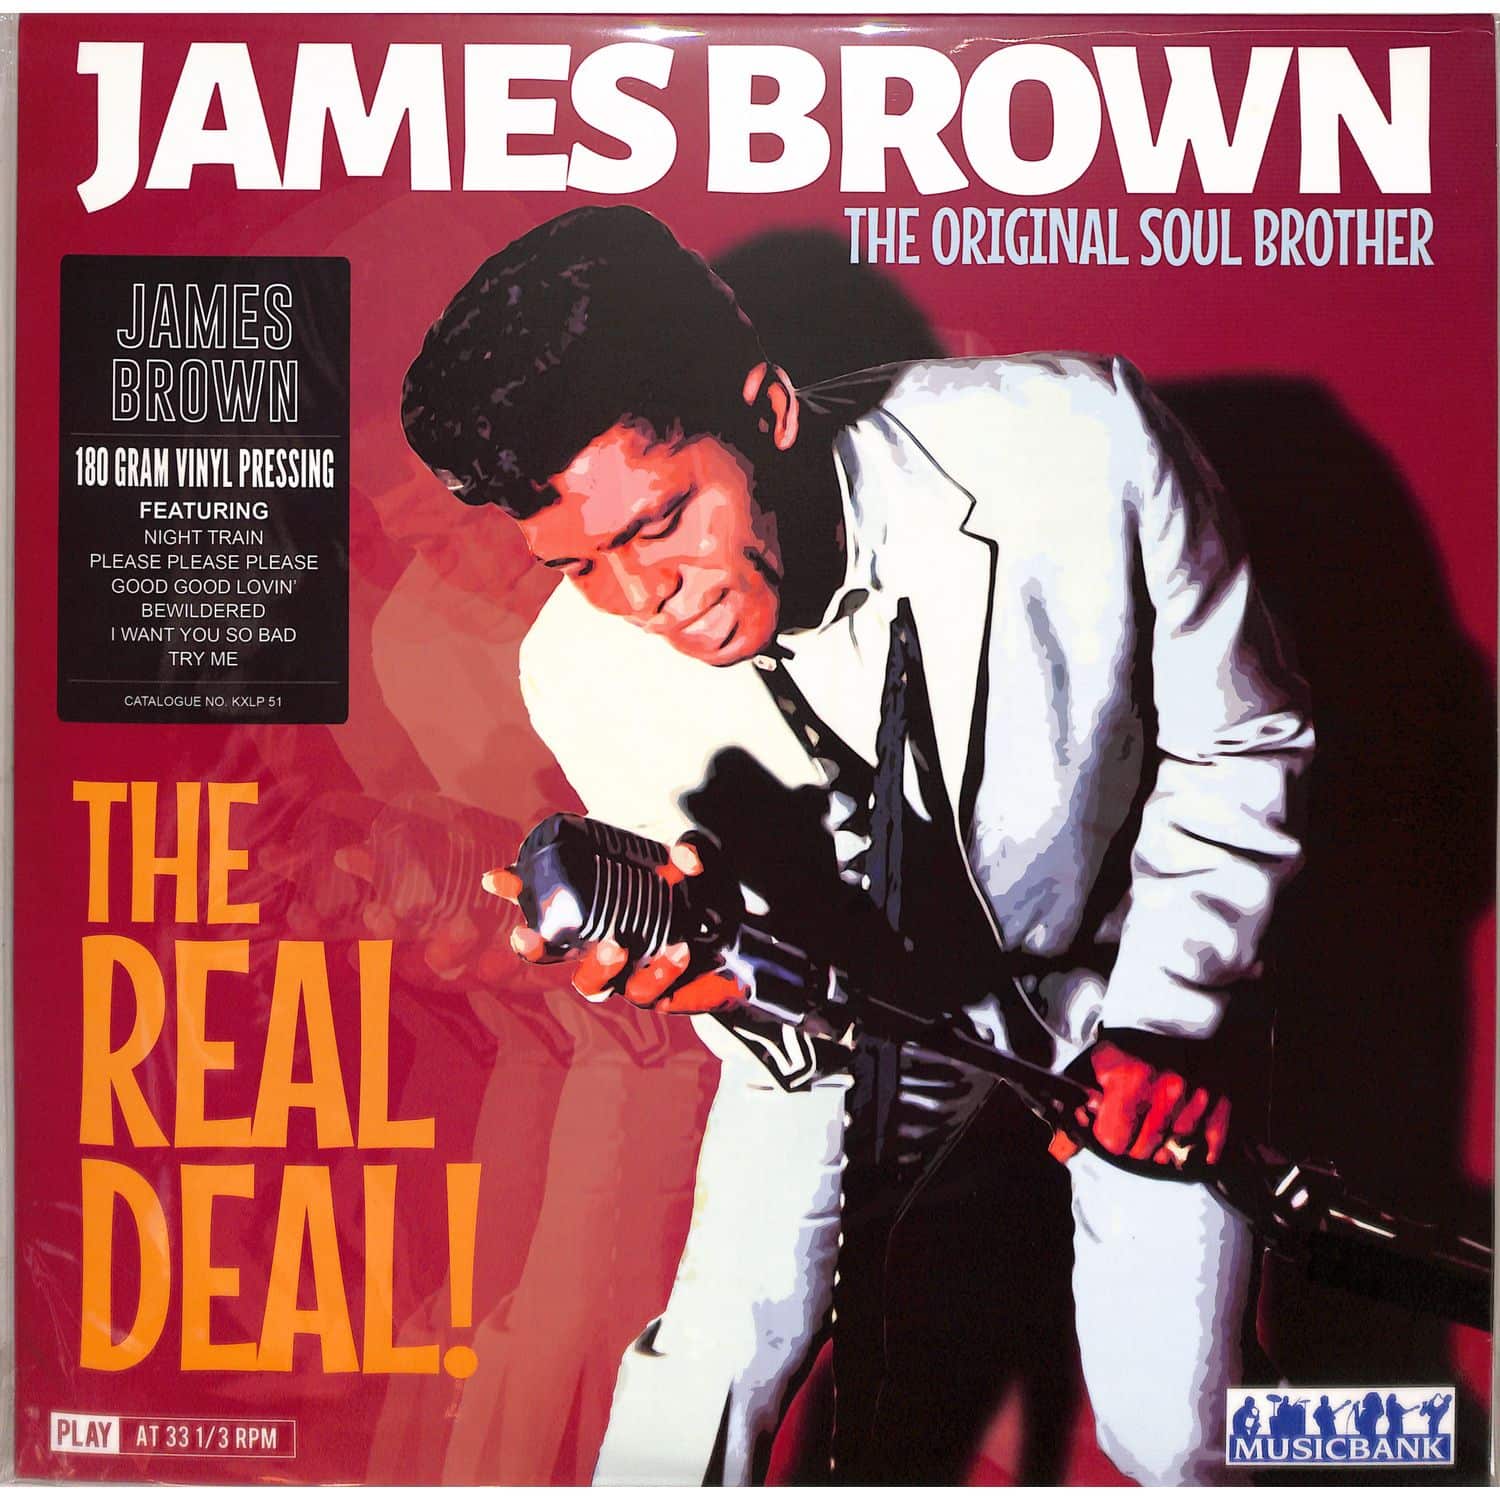 James Brown - THE ORIGINAL SOUL BROTHER - THE REAL DEAL! 